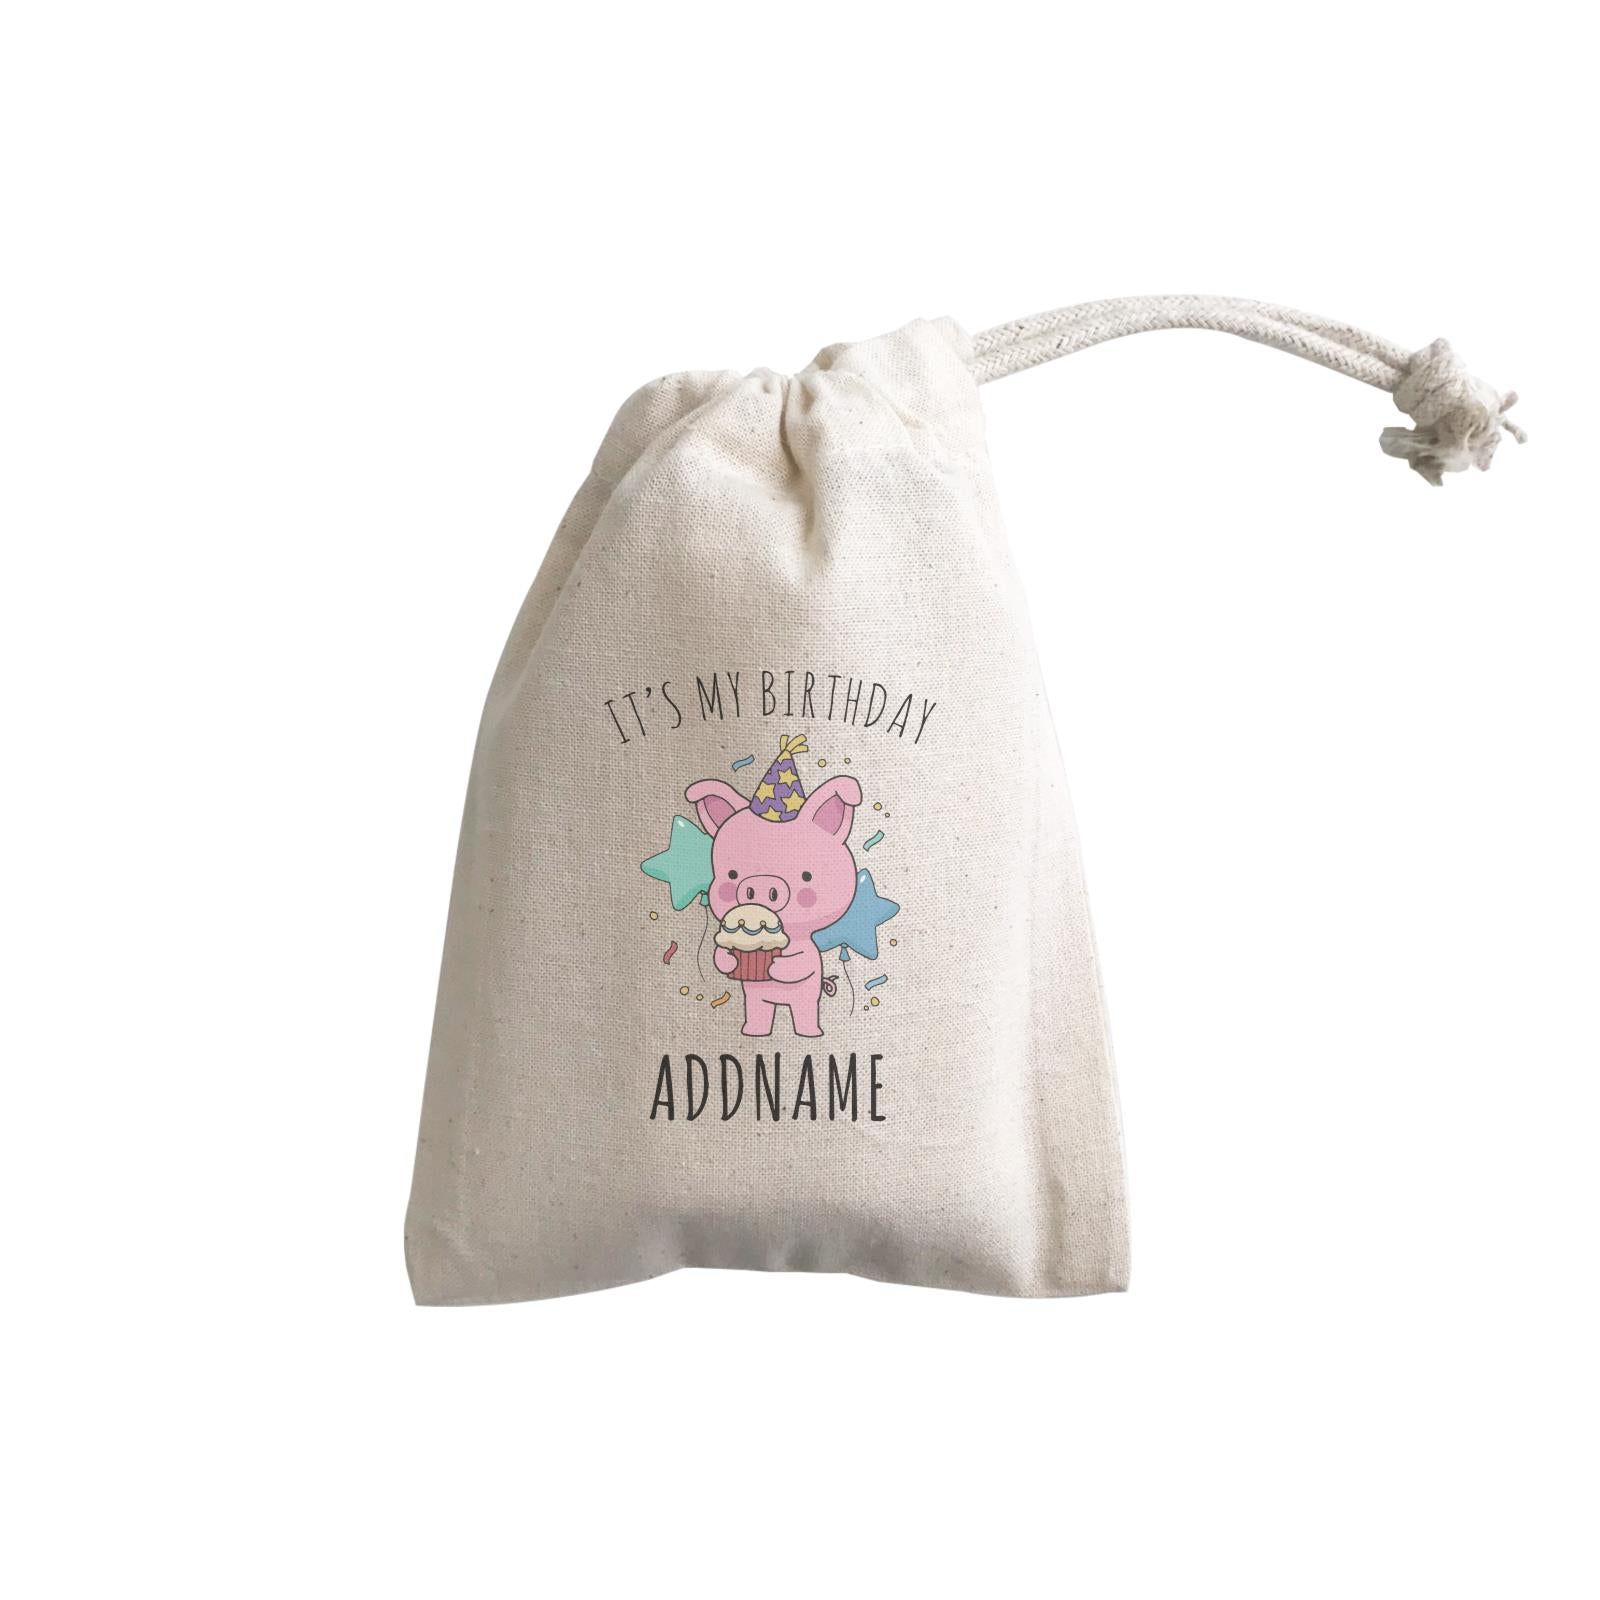 Birthday Sketch Animals Pig with Party Hat Eating Cupcake It's My Birthday Addname GP Gift Pouch